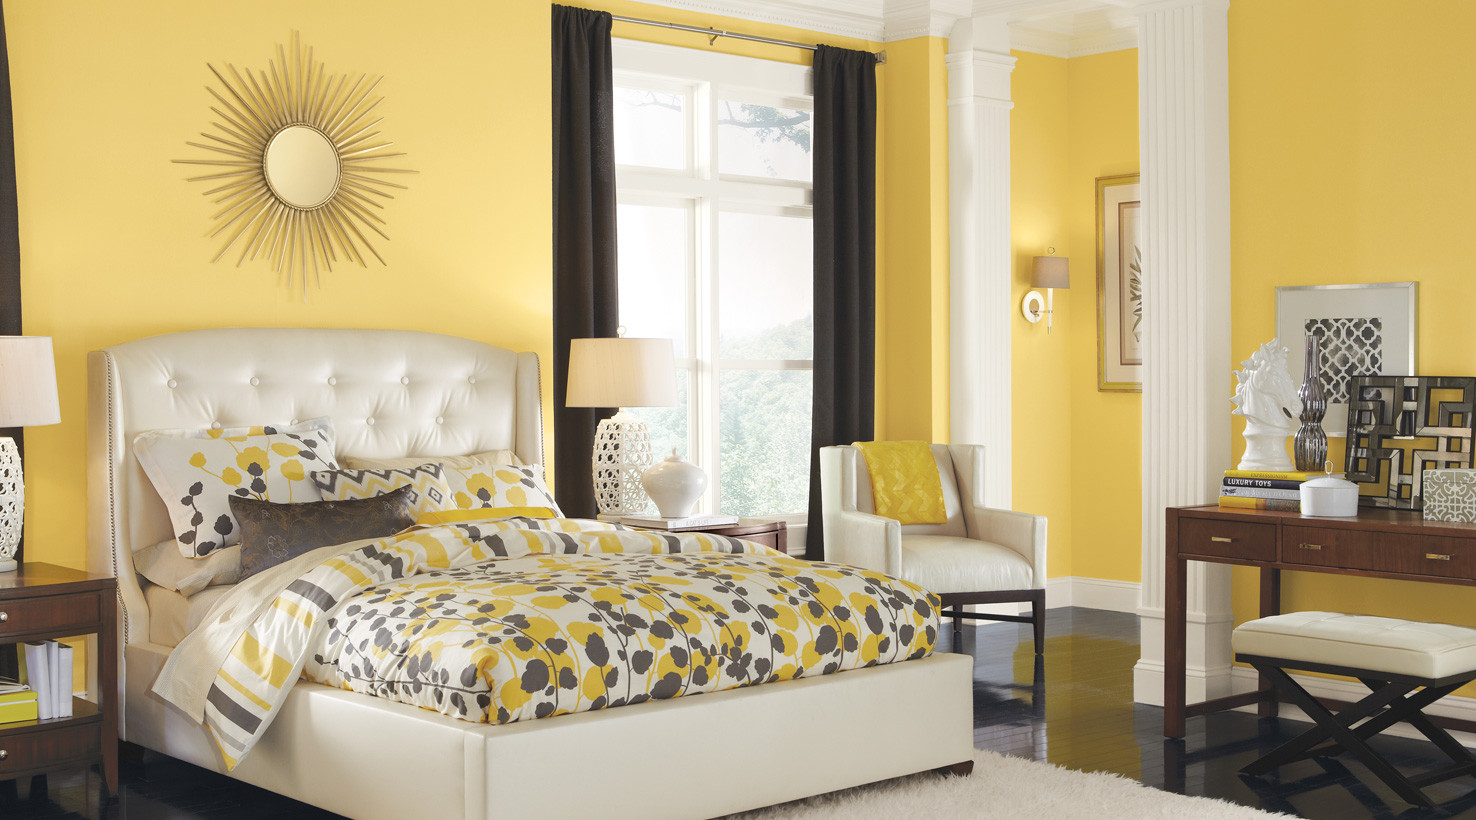 Sherwin Williams Bedroom Colors
 Bedroom Paint Color Ideas Inspiration Gallery